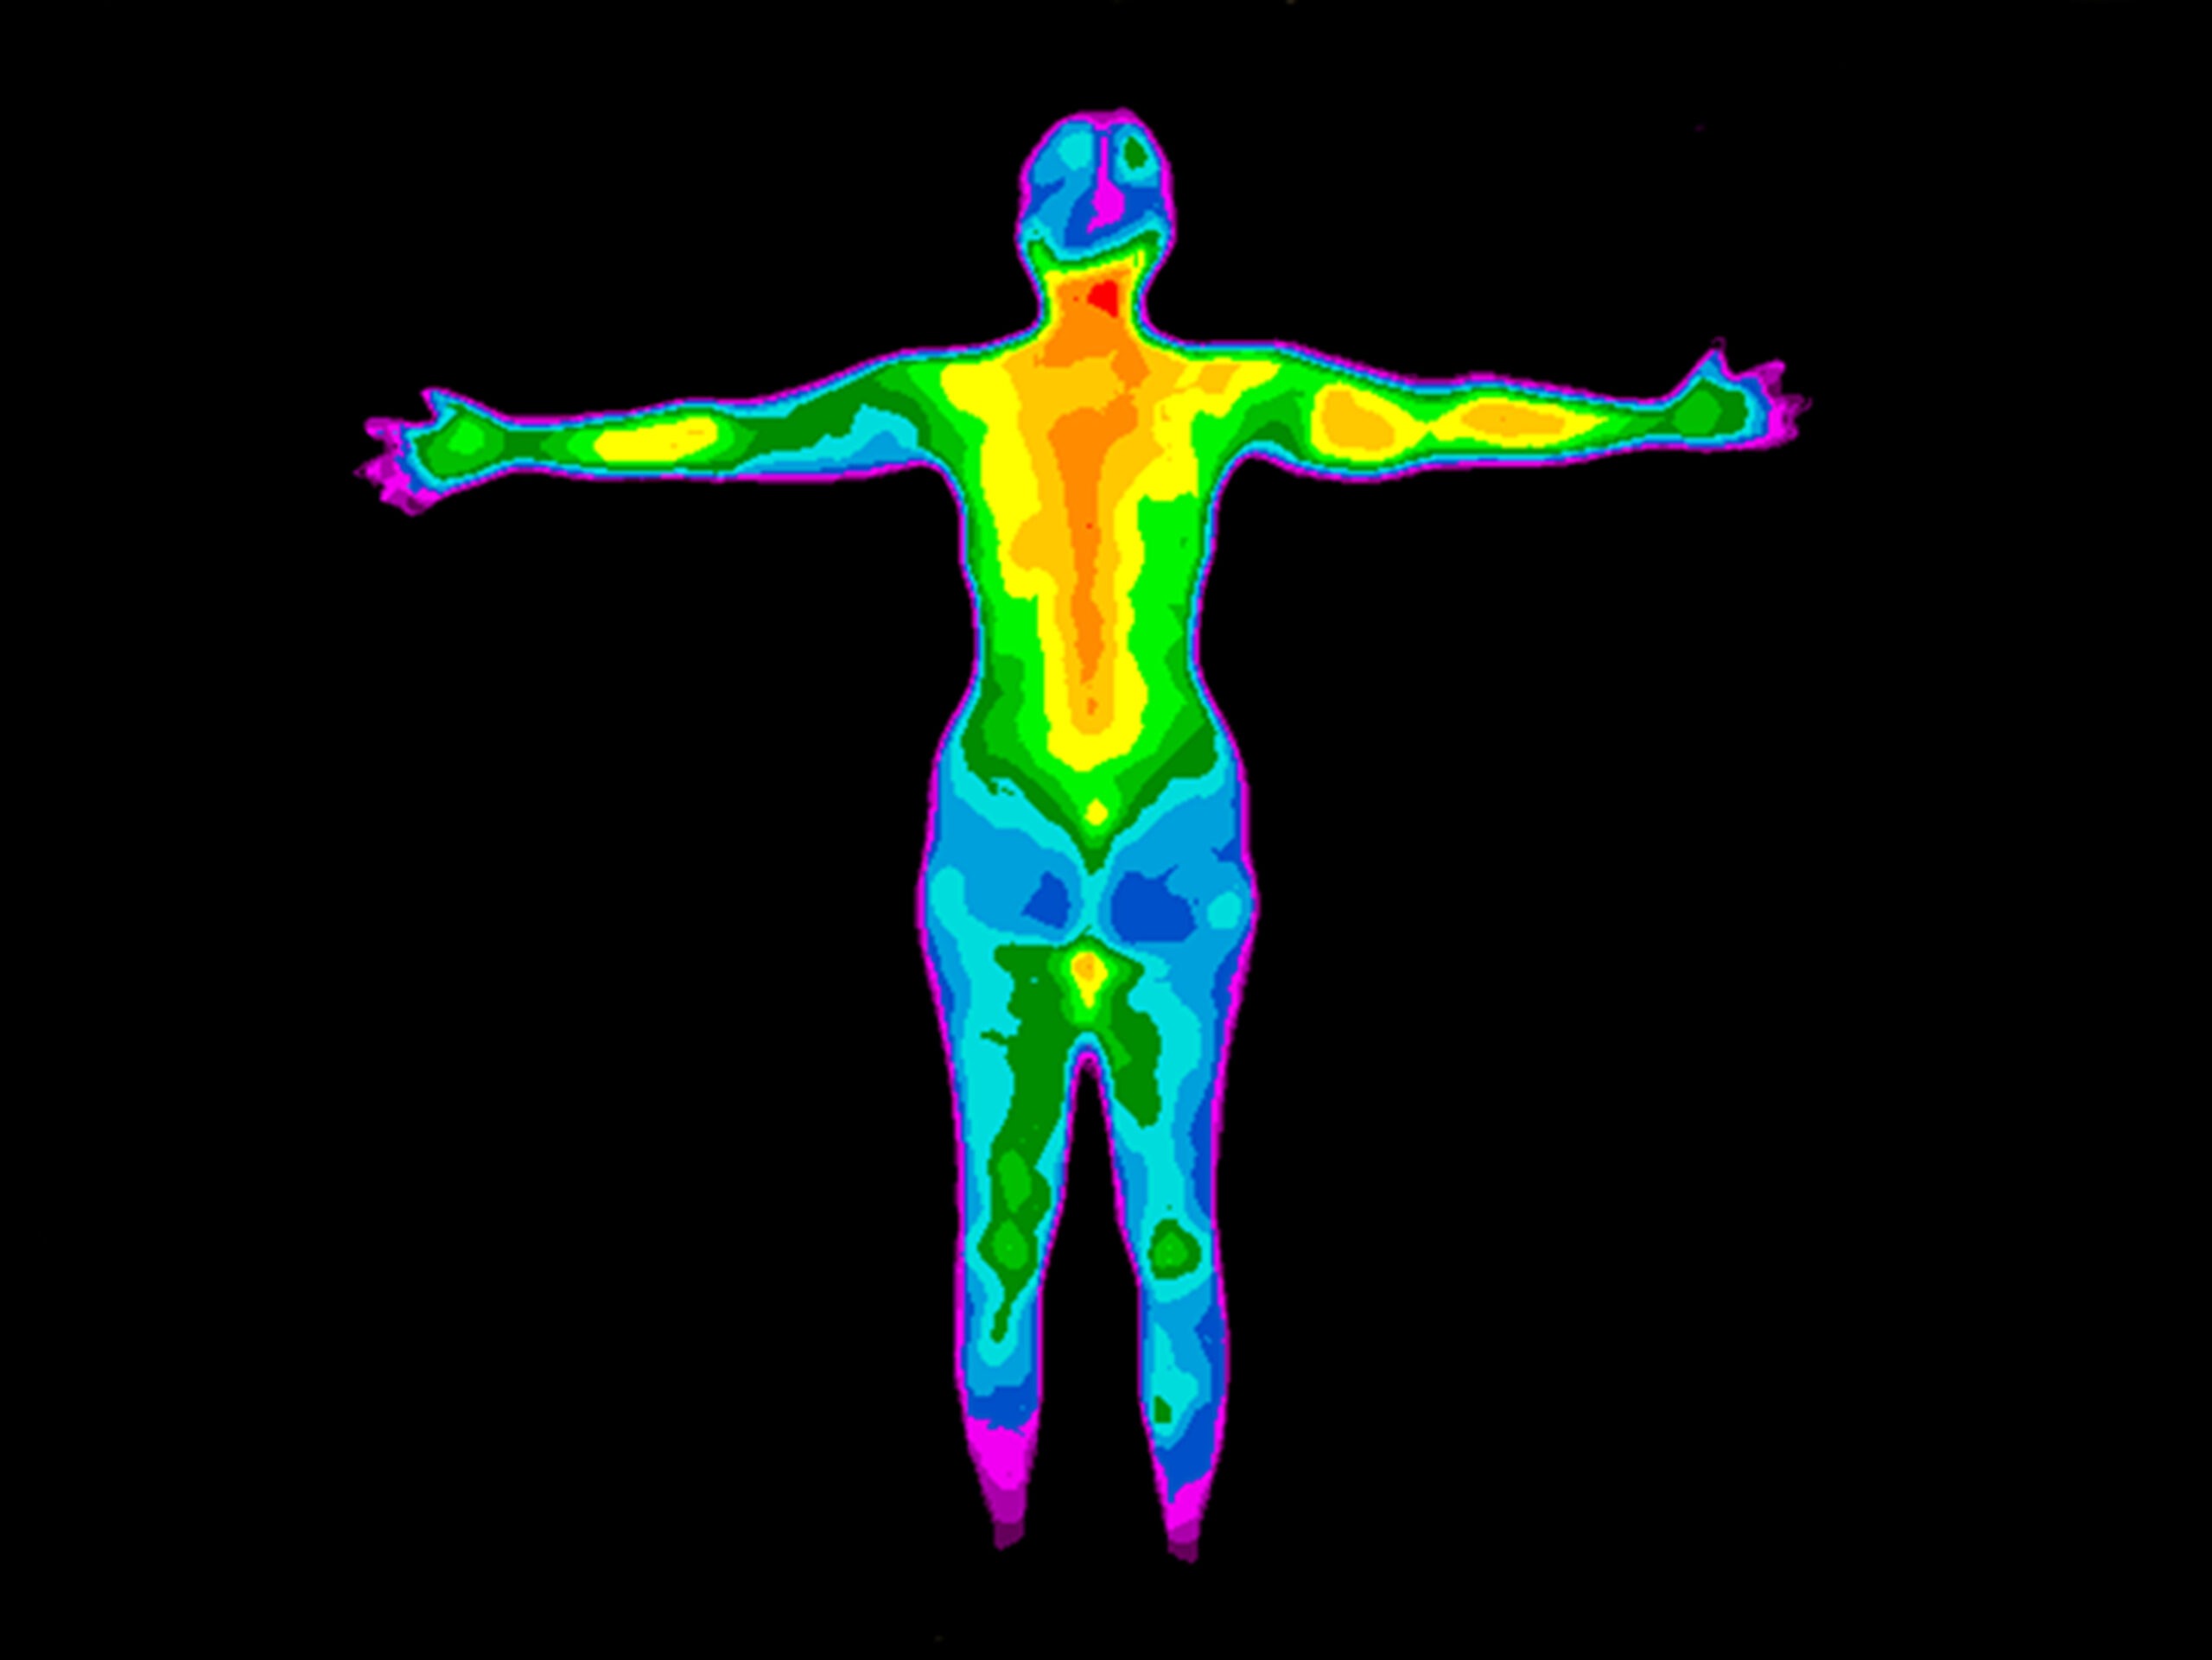 Thermographic image of the back of the whole body of a woman with the photo showing different temperatures in a range of colors from blue showing cold to red showing hot which can indicate joint inflammation.